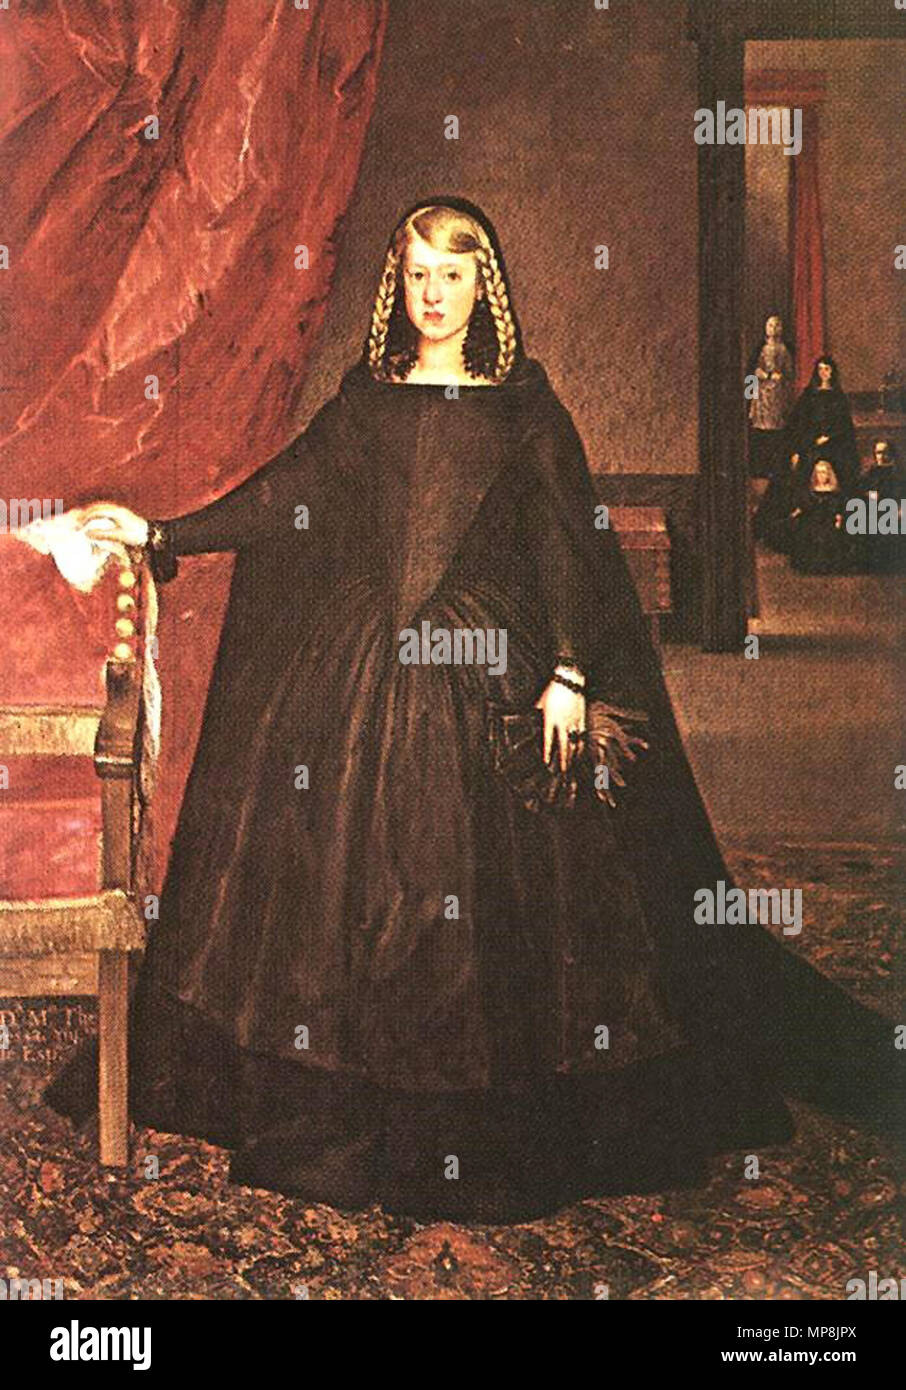 Spanish: La emperatriz Margarita de Austria The Empress Doña Margarita de Austria in Mourning Dress.  English: The sitter is Margaret of Spain, first wife of Leopold I, Holy Roman Emperor, wearing mourning dress for her father, Philip IV of Spain, with children and attendants in mourning dress. . 1666.   747 Juan Bautista Martinez del Mazo Stock Photo